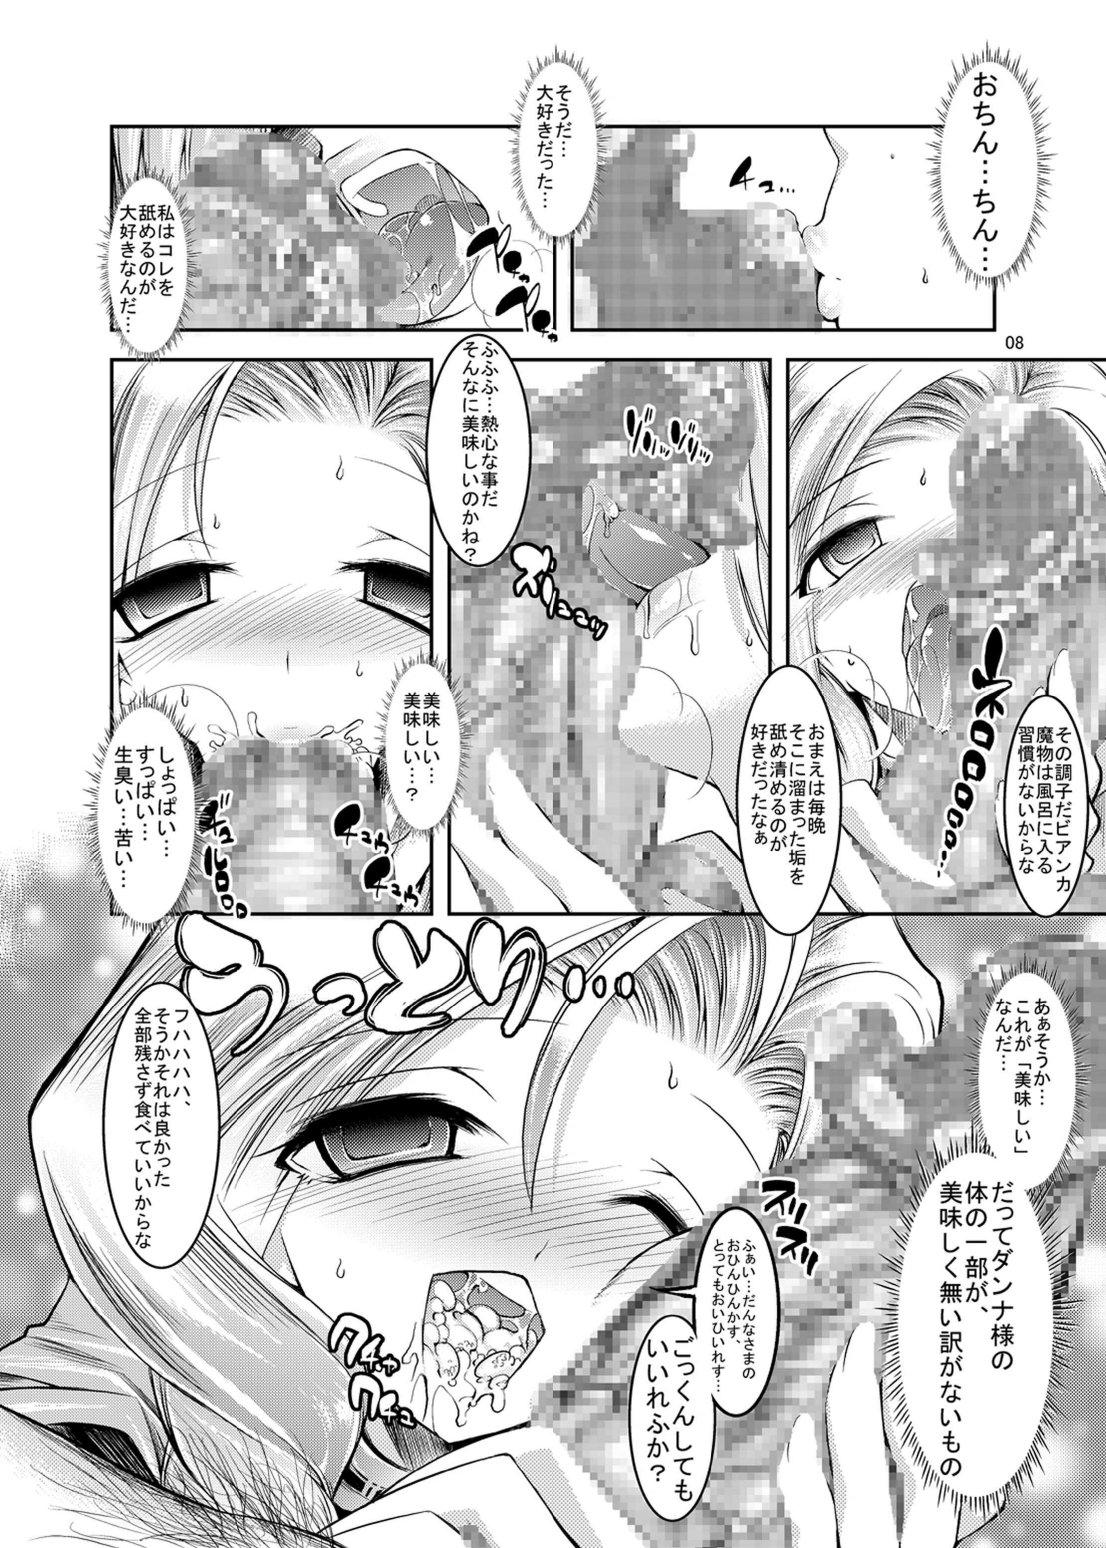 Culote Medapani Quest Bianca-hen - Dragon quest v Shaking - Page 8